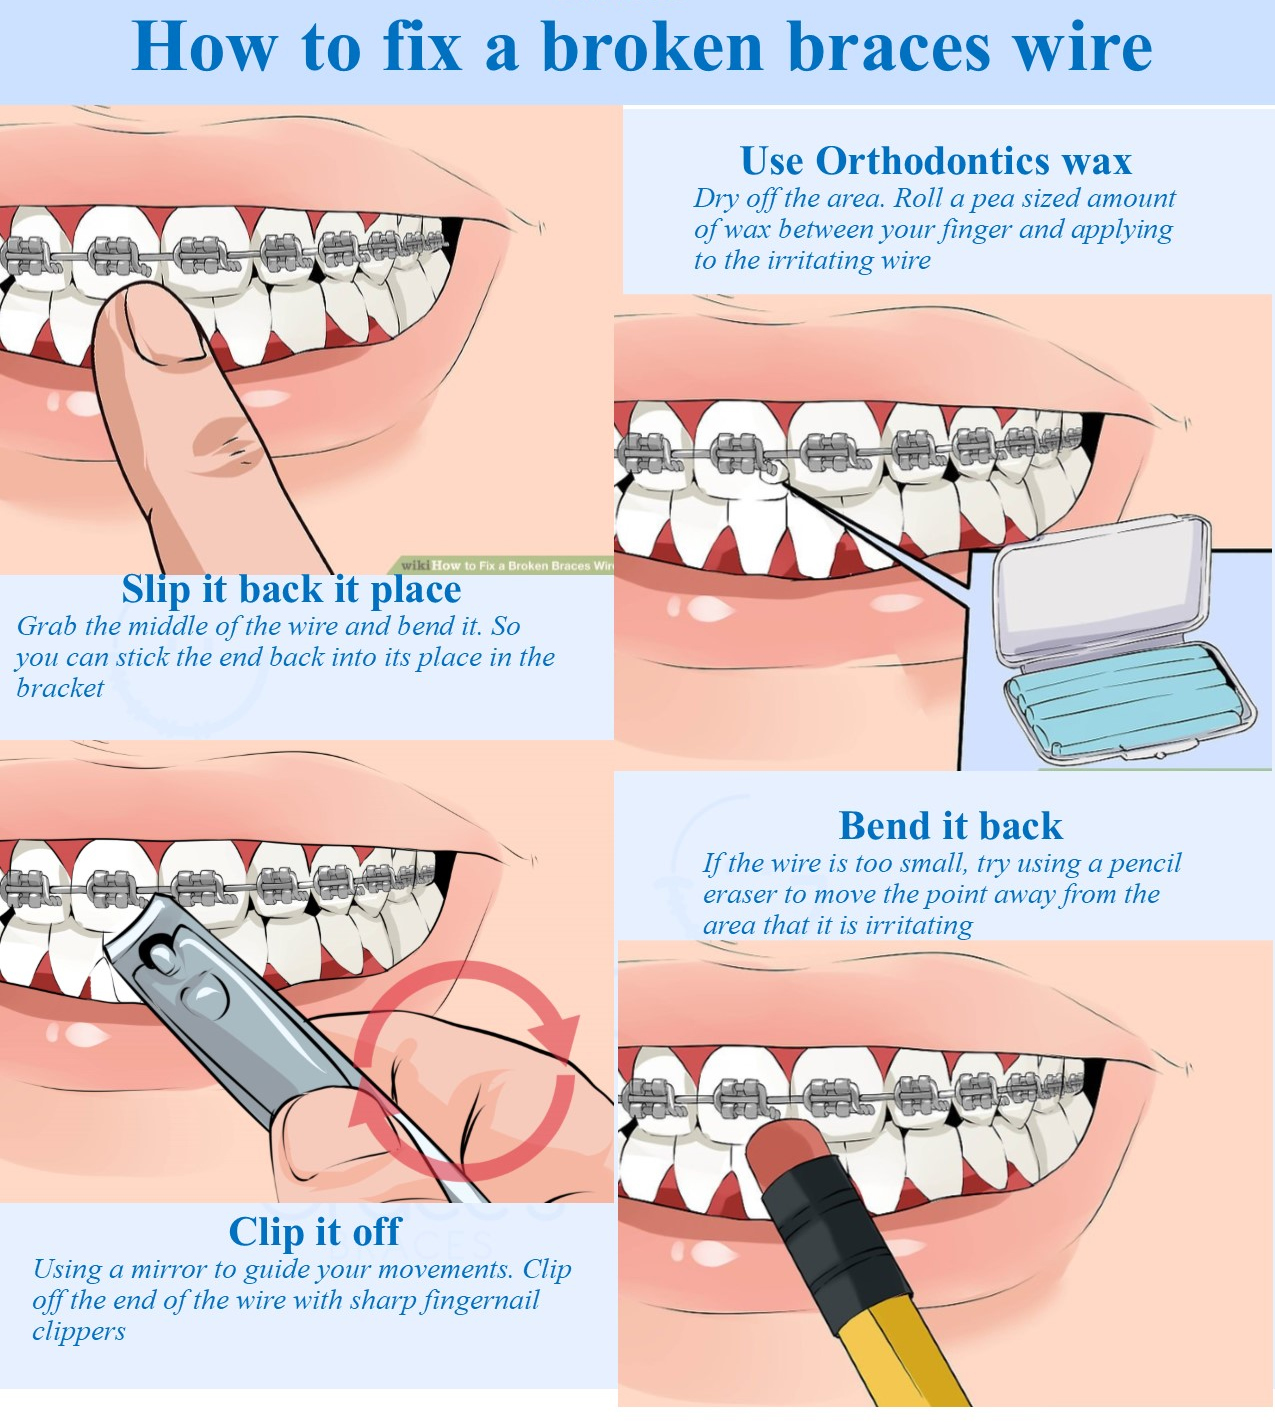 How To Ease The Pain Of Poking Wires - Sure Dental